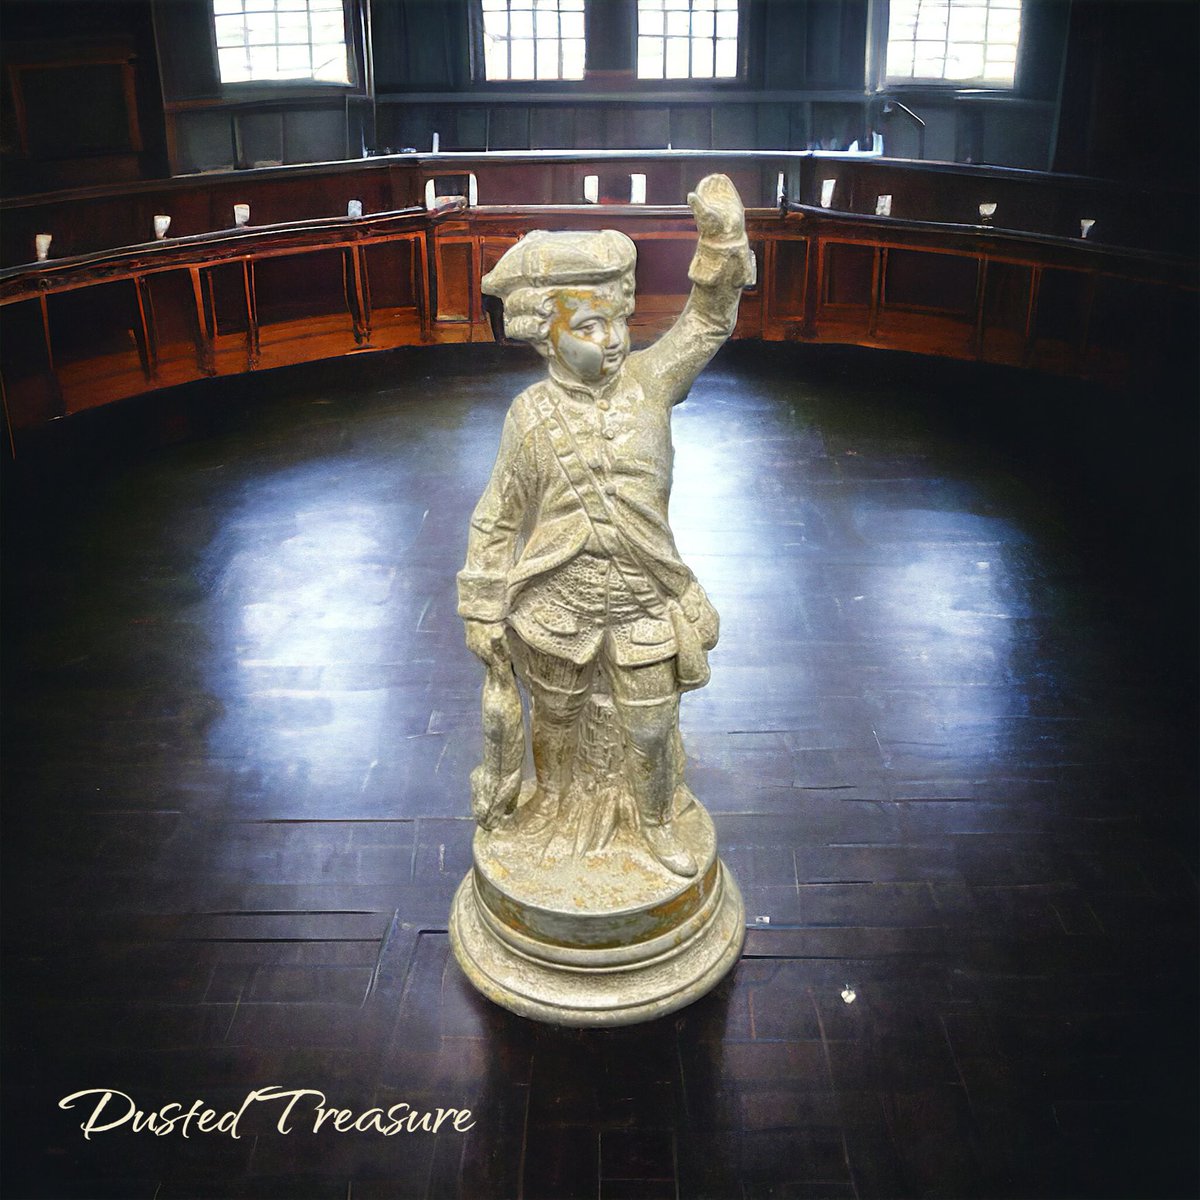 dustedtreasure.com
Or AndysDustedTreasure.etsy.com
This is a great piece. A British soldier finial, the soldier is holding a rabbit that he must’ve just caught for dinner. Screw hole on the bottom to screw onto a screw top post or staff. Visit me today!
#finials #britishsoldier